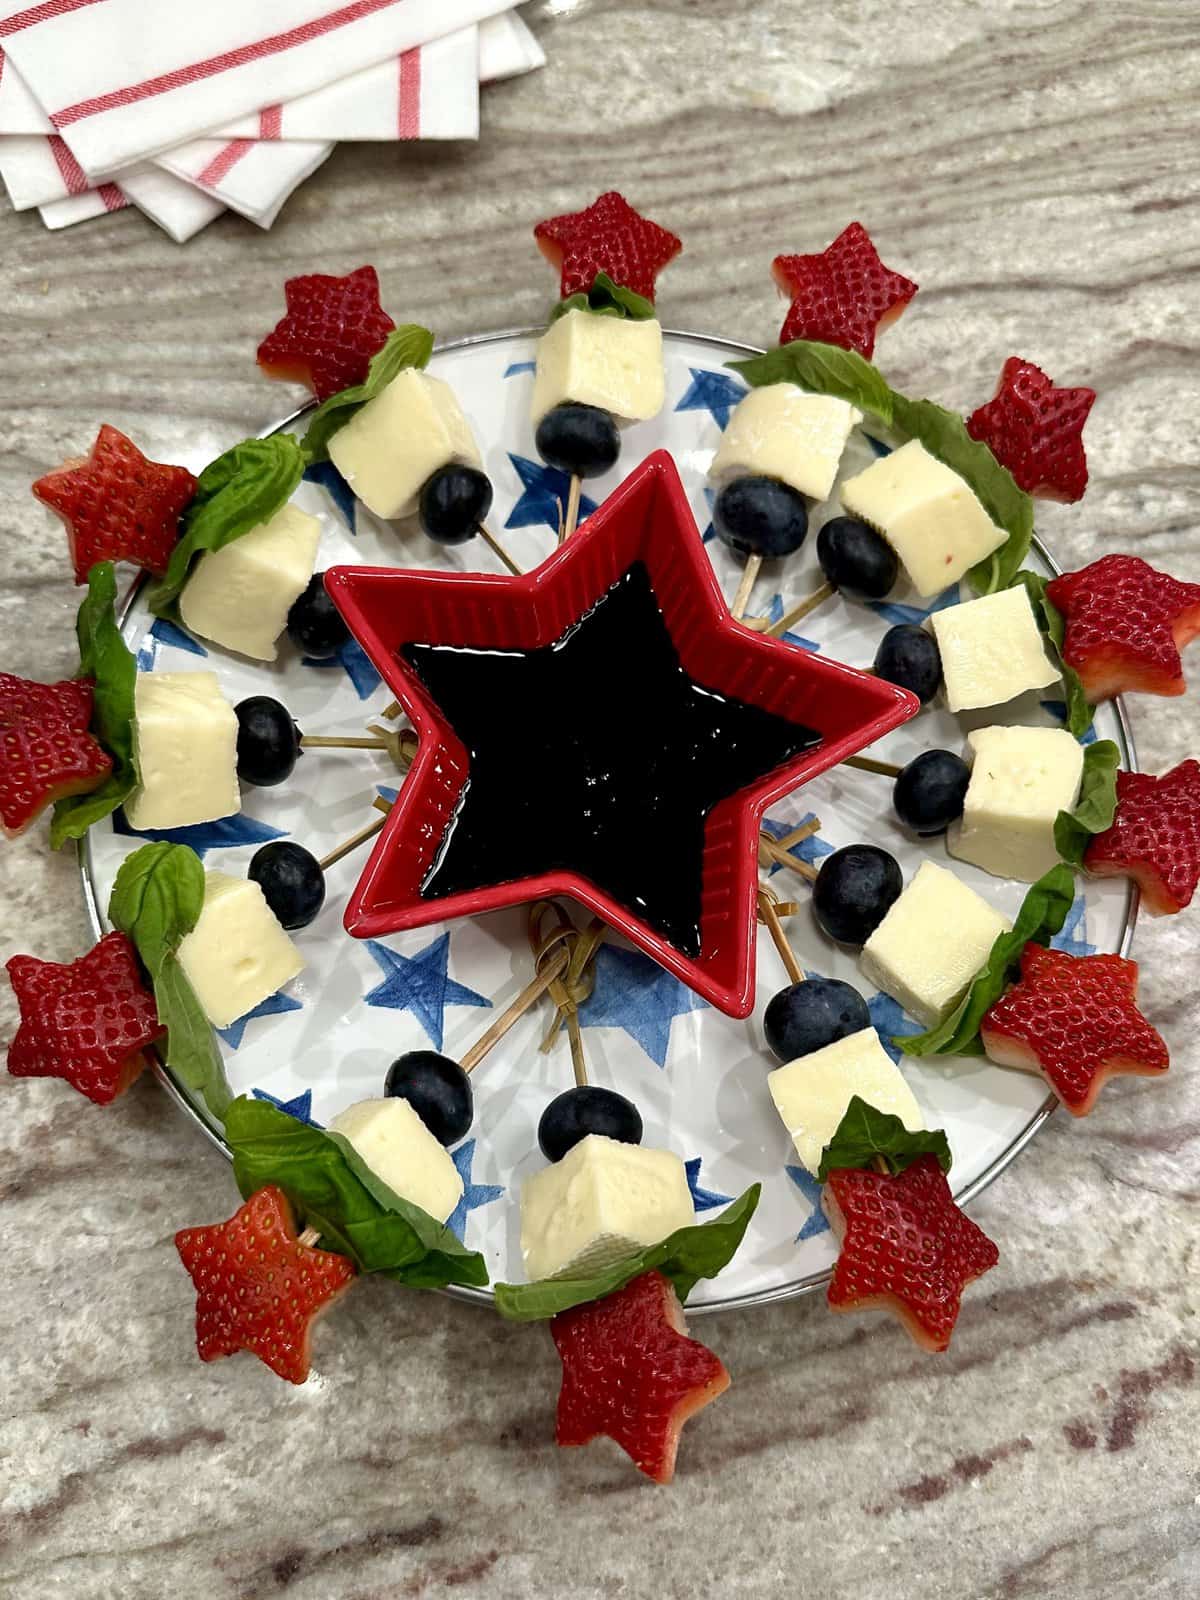 Star-shaped strawberry halves on fruits skewer with chunks of brie and blueberries surrounding a red star bowl filled with balsamic glaze.